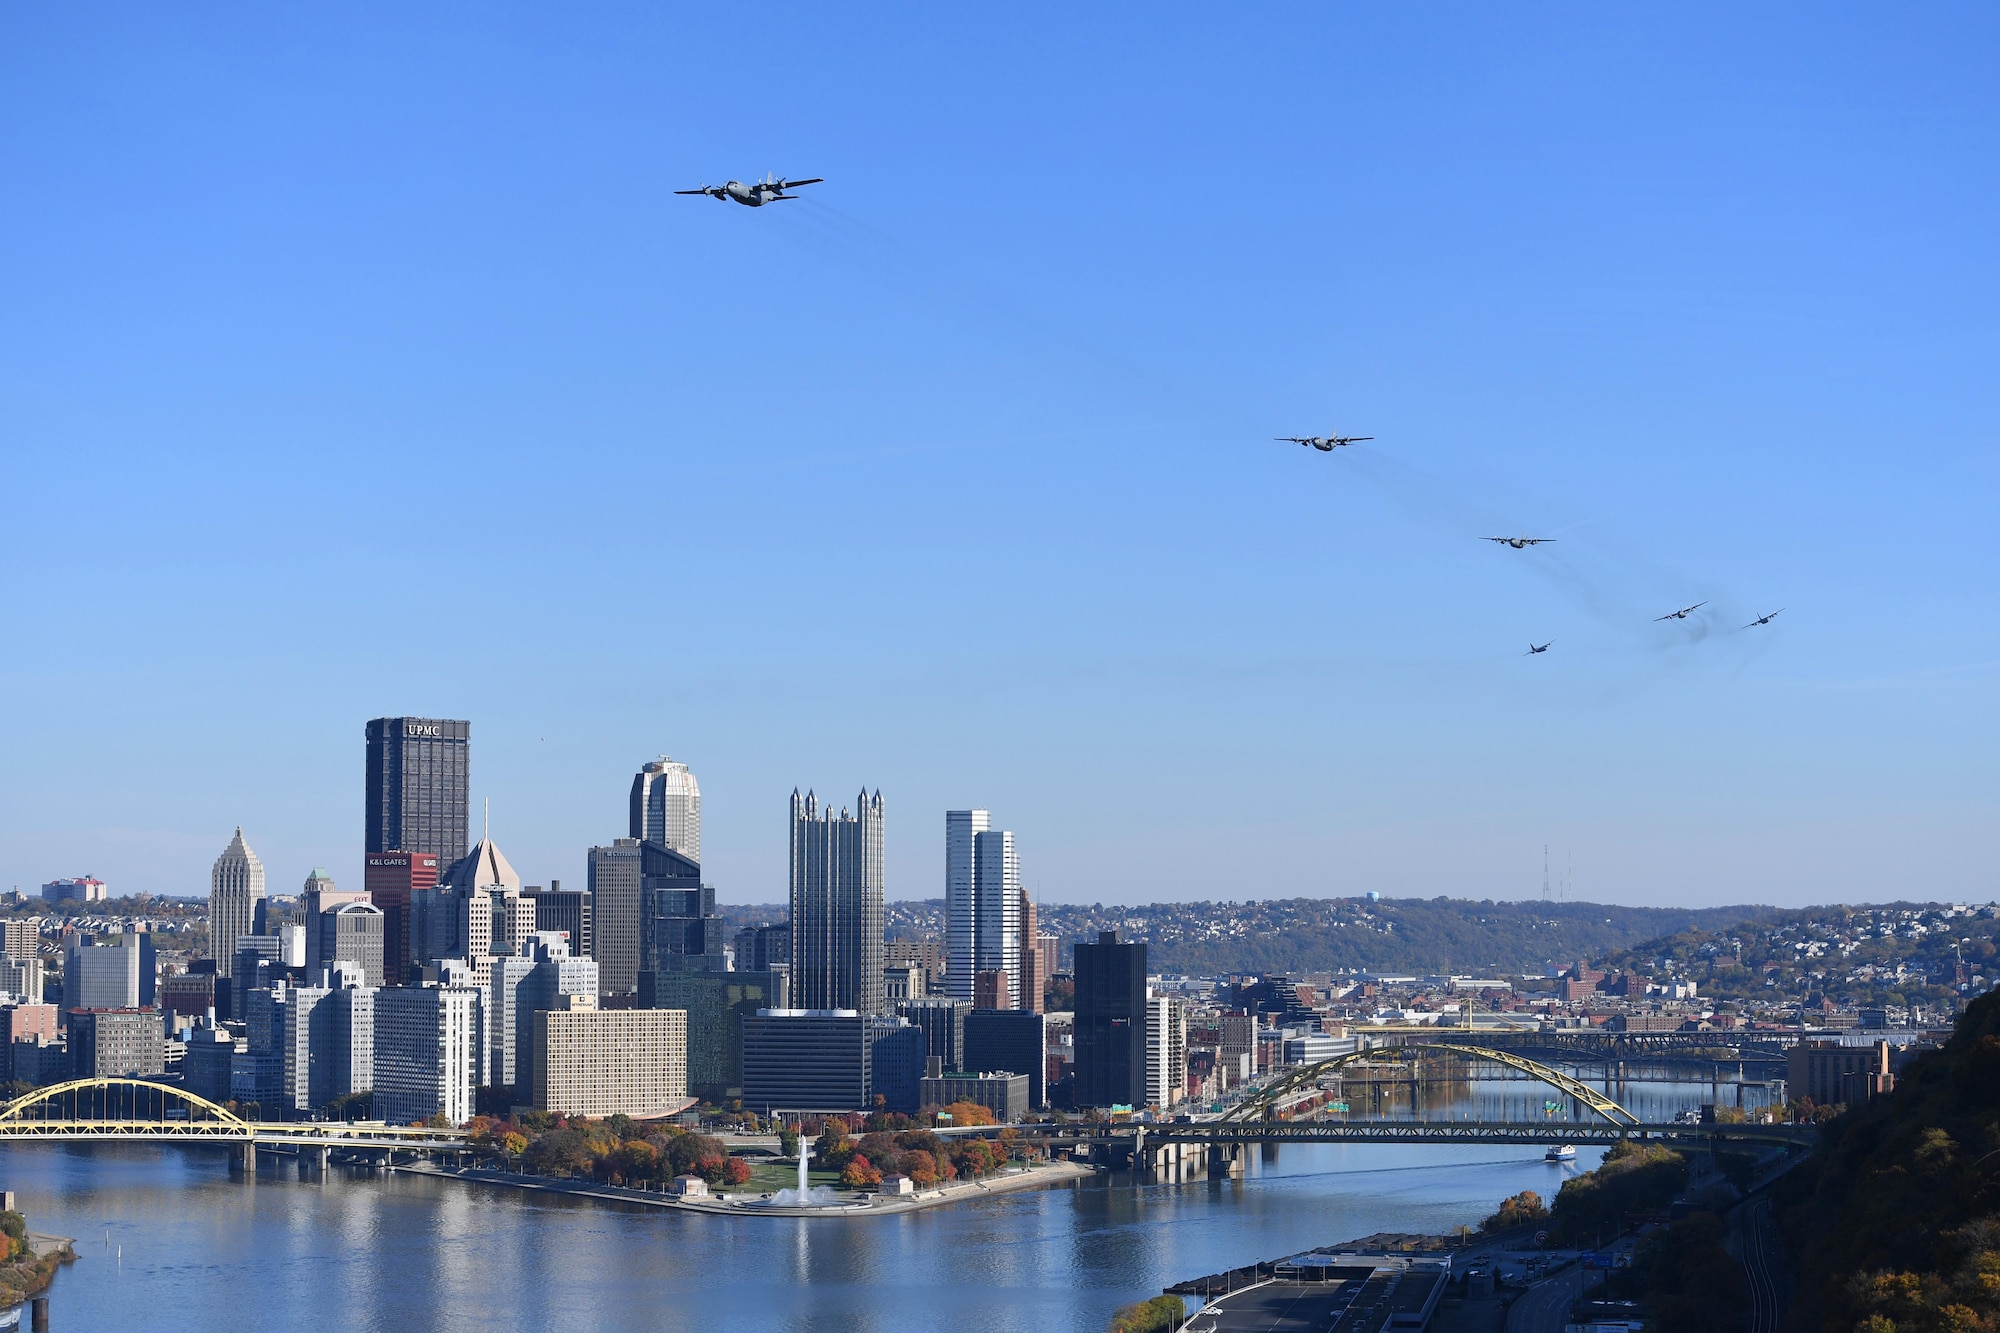 Six C-130 Hercules aircraft fly over the city of Pittsburgh, Pennsylvania, November 6, 2016. This flyover signaled the end of what could be the last C-130H generation exercise at the Pittsburgh International Airport Air Reserve Station before a potential C-17 mission change. (U.S. Air Force photo by Staff Sgt. Marjorie A. Bowlden)